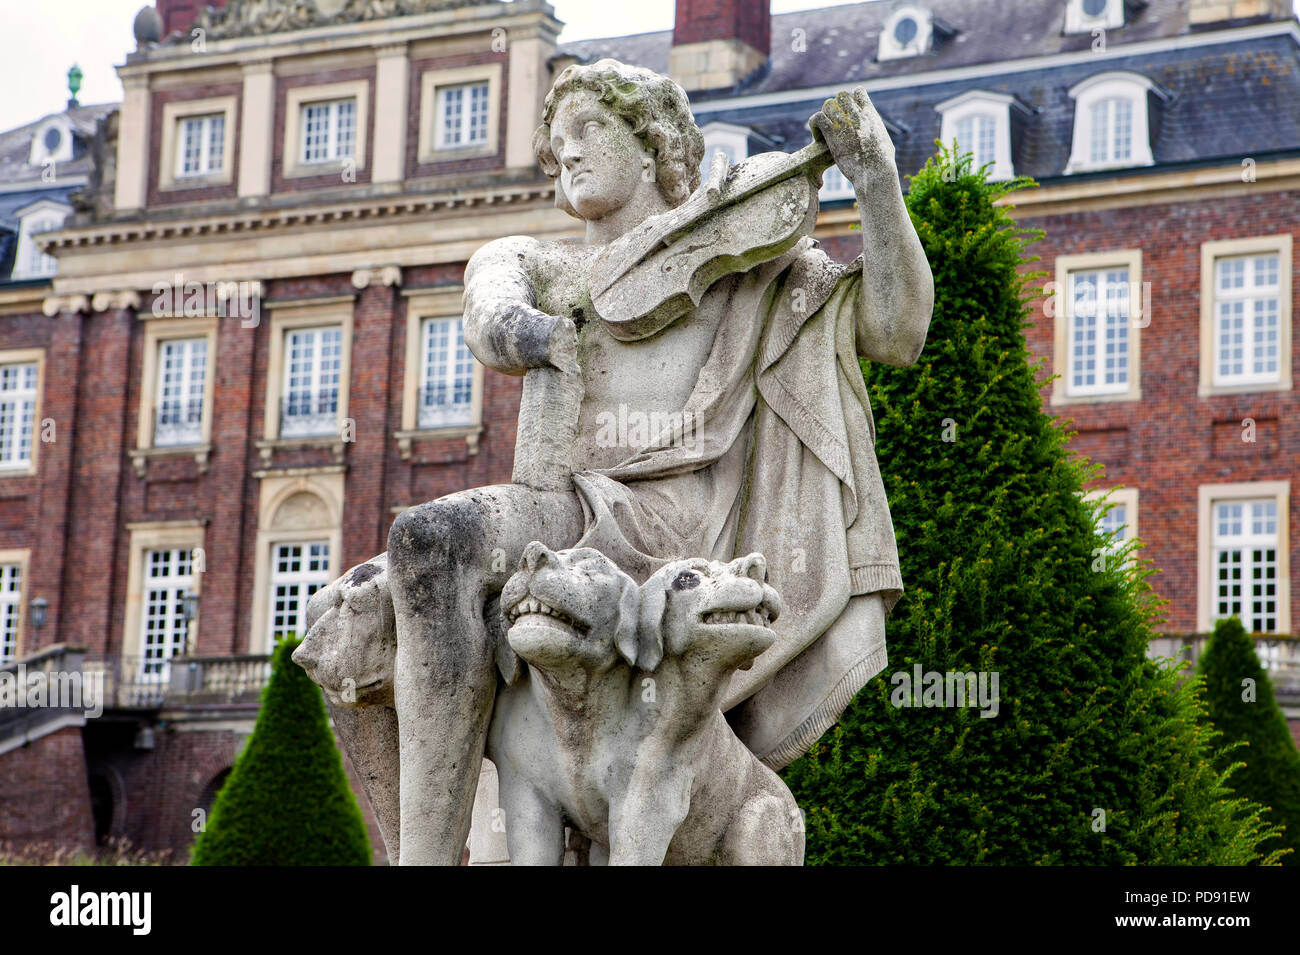 A baroque violinist, sculpture at Nordkirchen Moated Palace, Germany Stock Photo